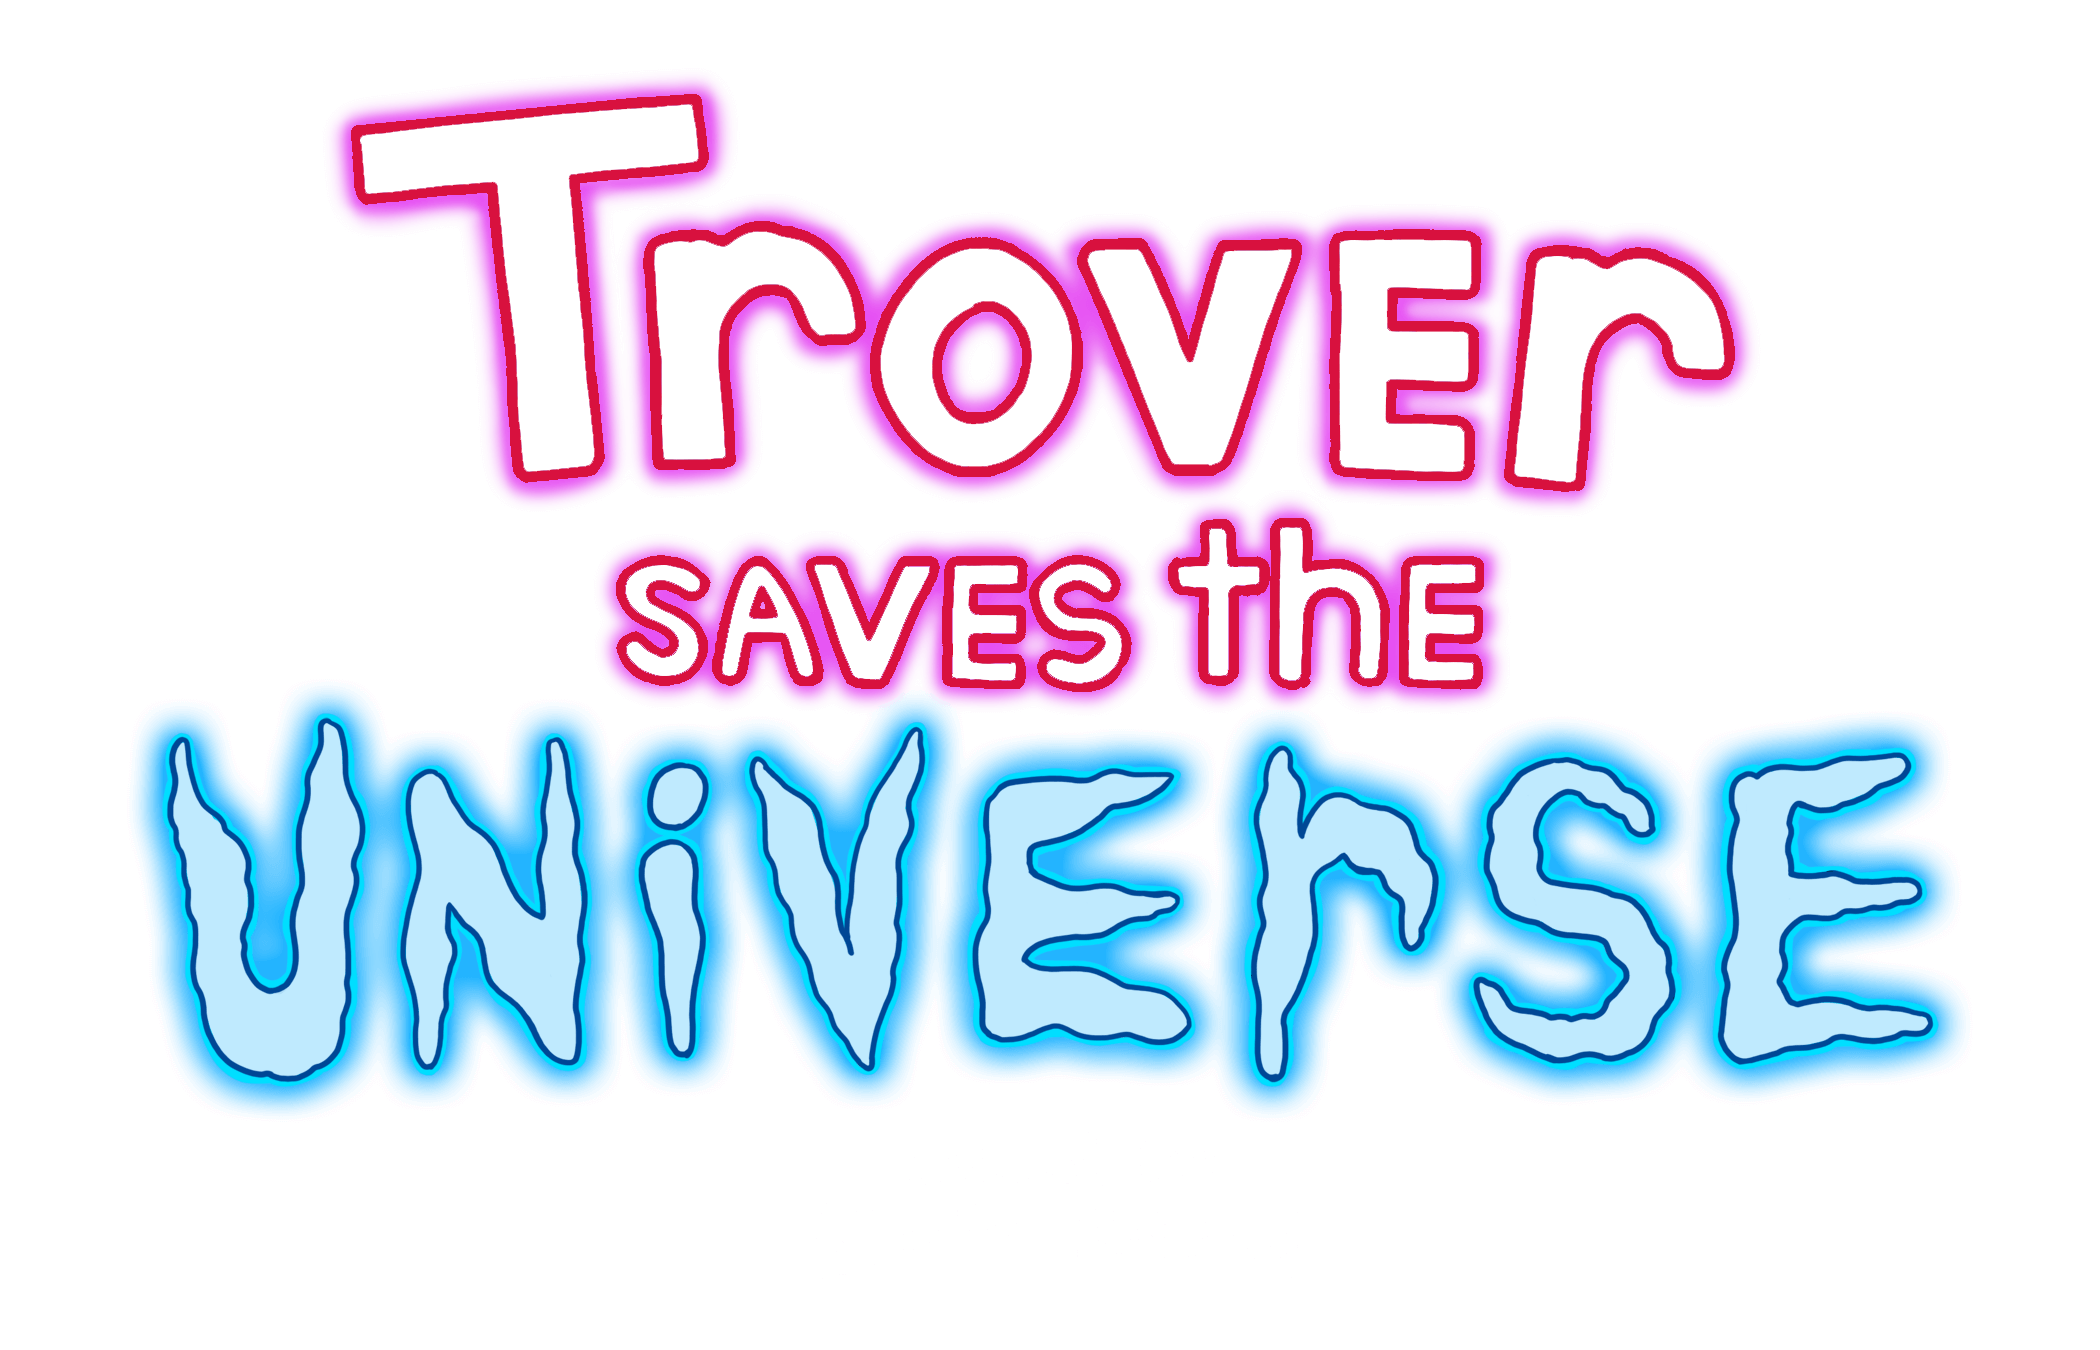 Trover Saves the Universe Saves the Universe